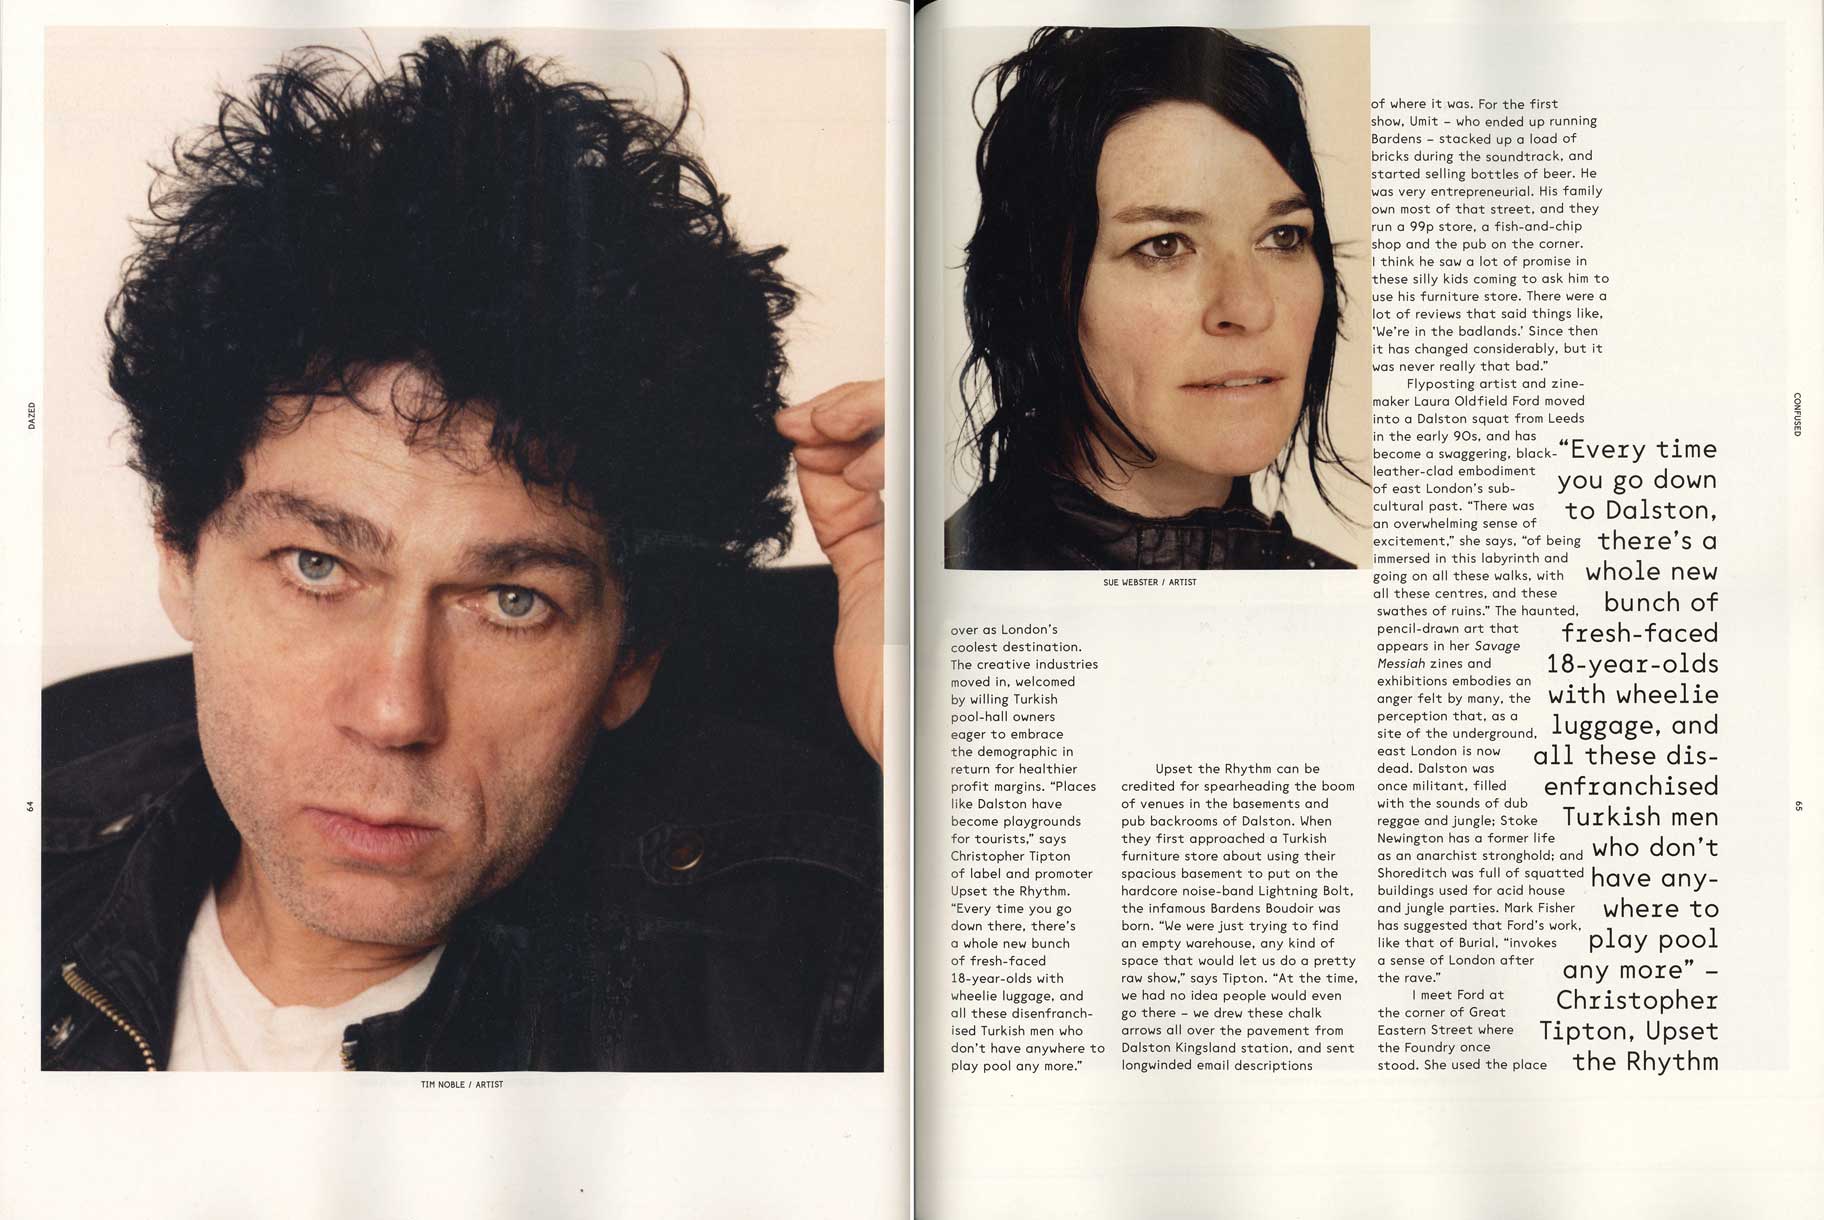 Dazed & Confused Magazine, May 2012 pgs 64-65